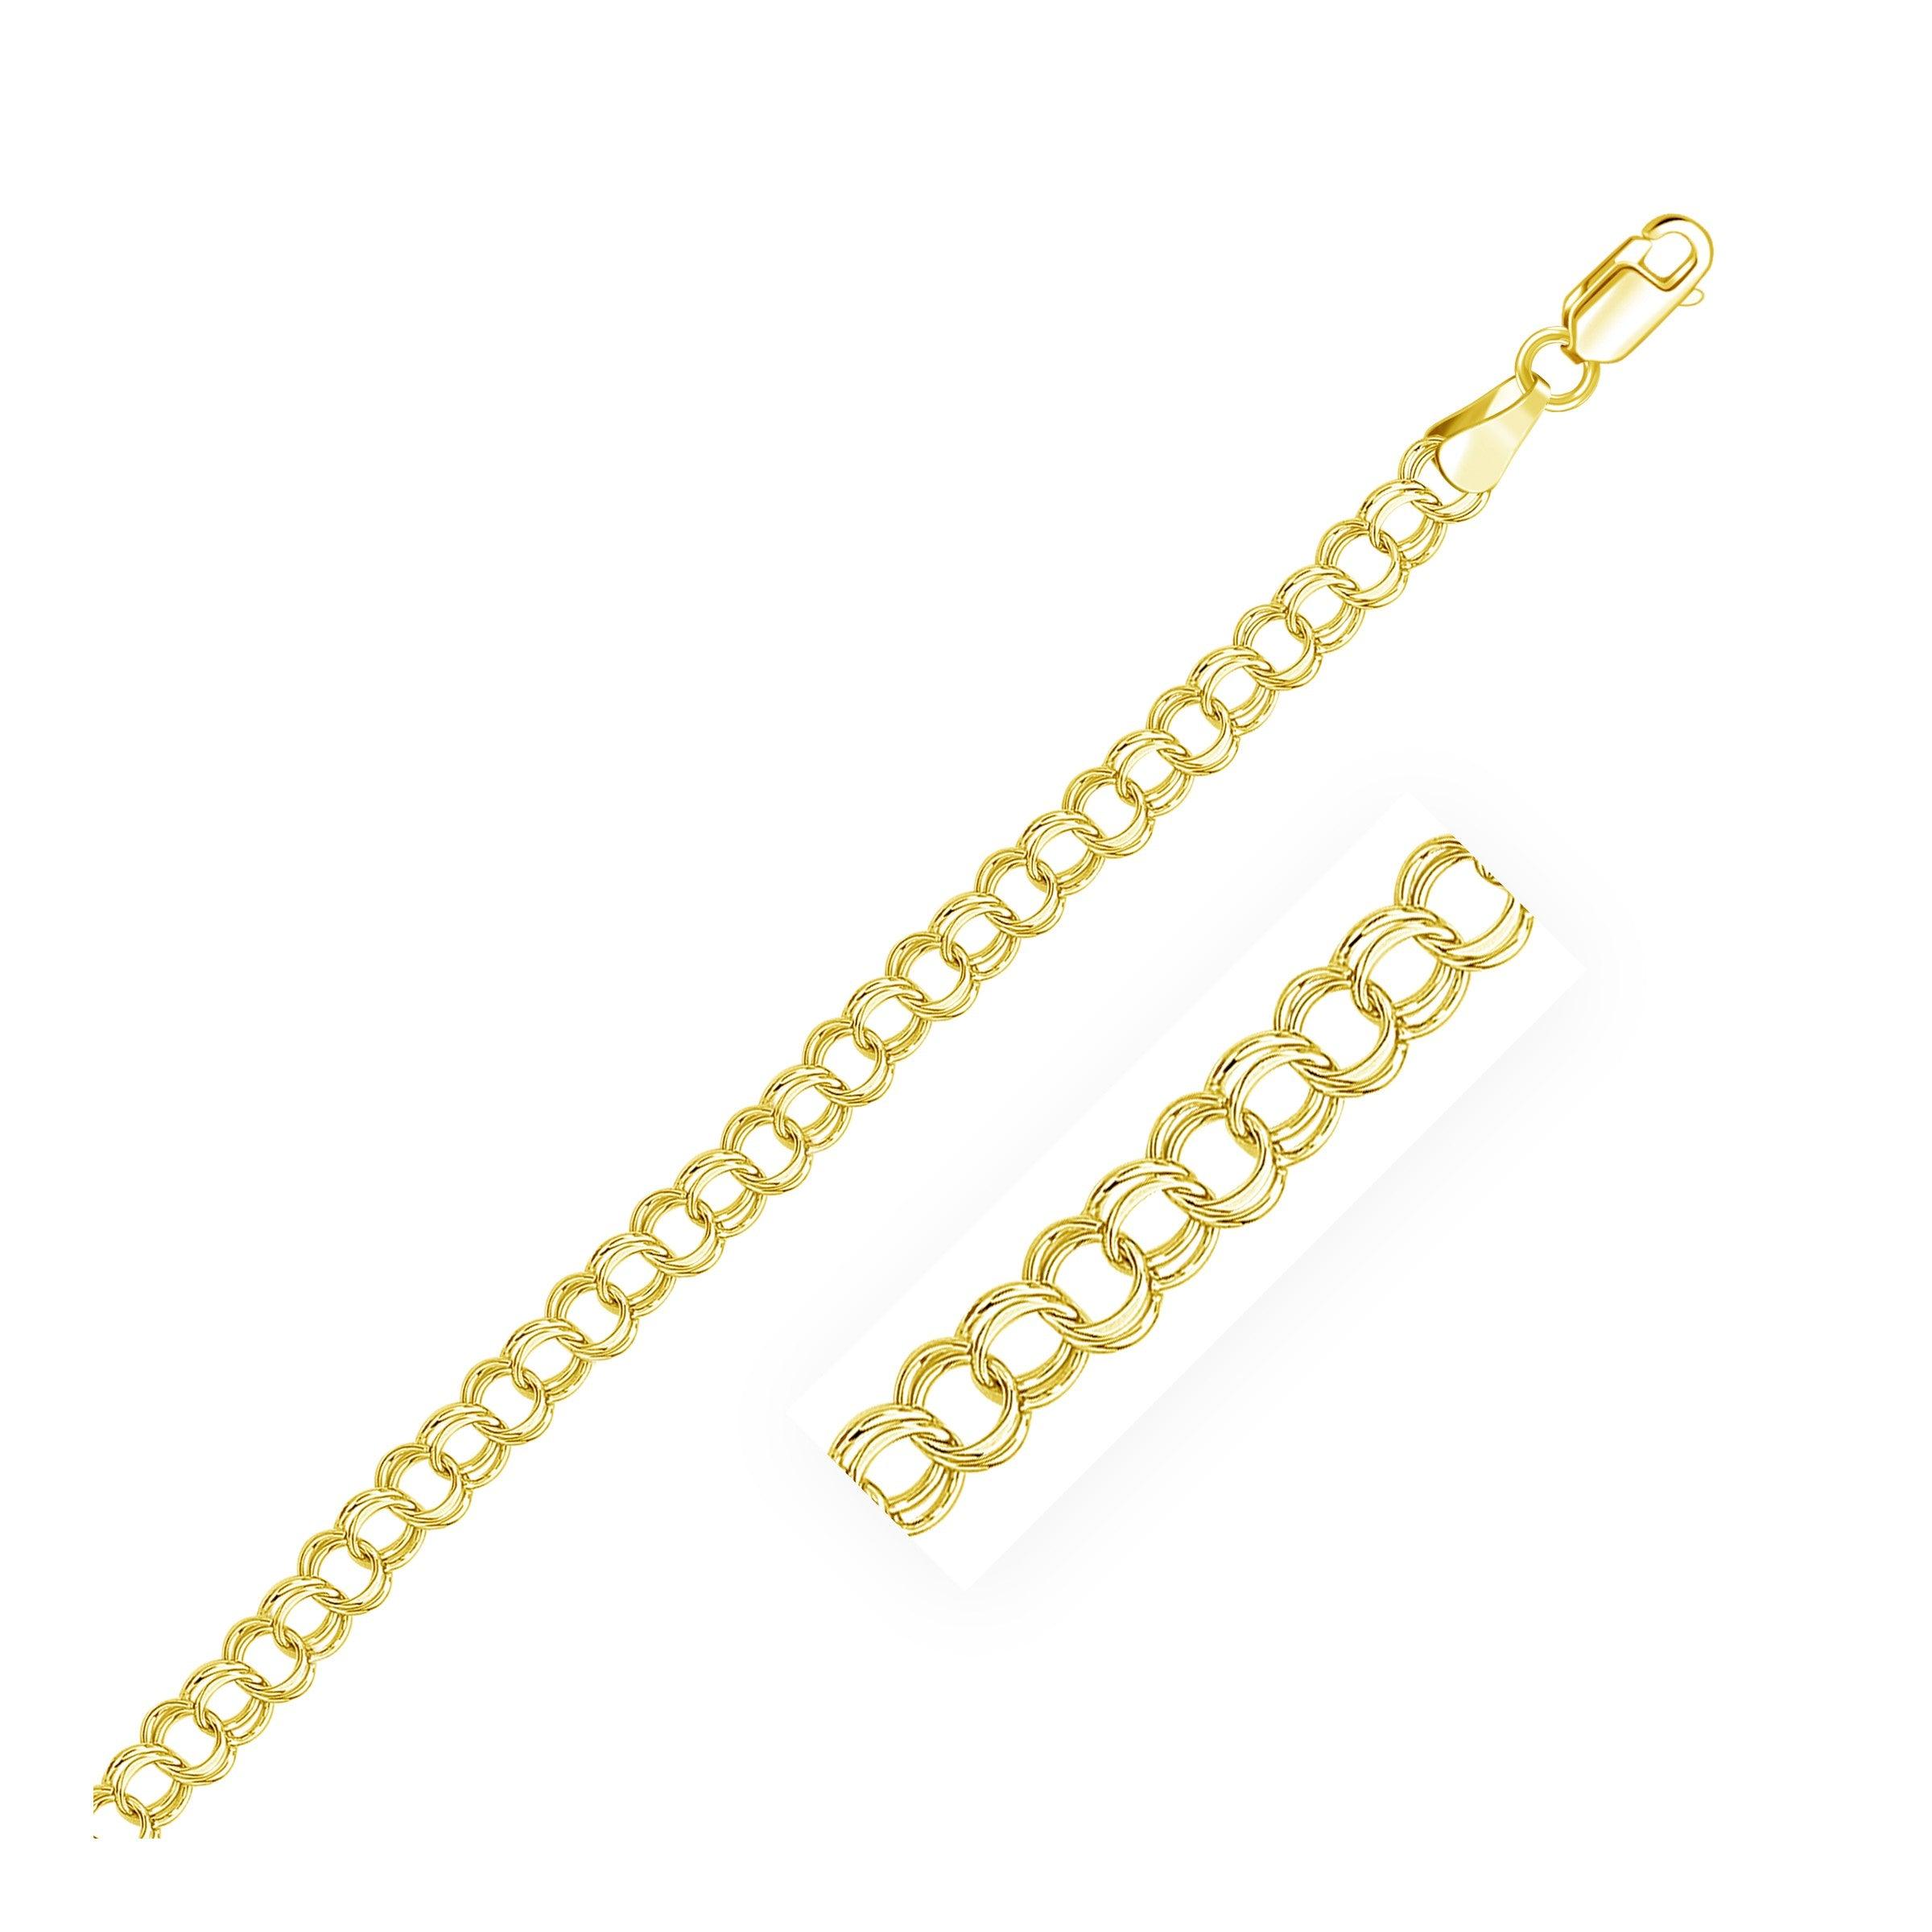 5.0 mm 14k Yellow Gold Solid Double Link Charm Bracelet freeshipping - Higher Class Elegance